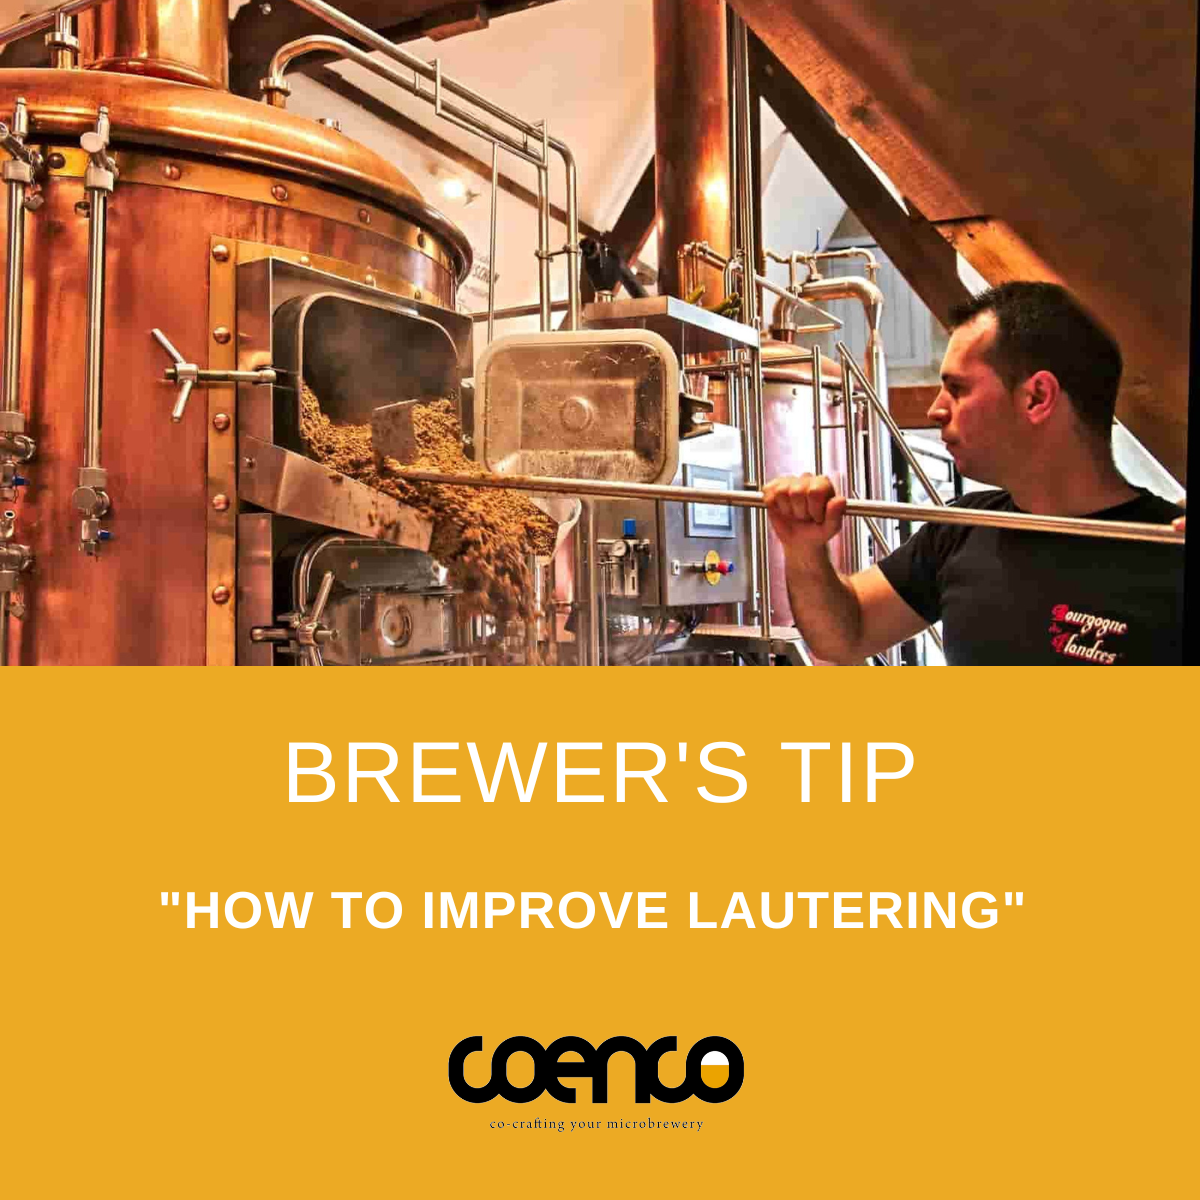 brewer's tip - how to improve lautering